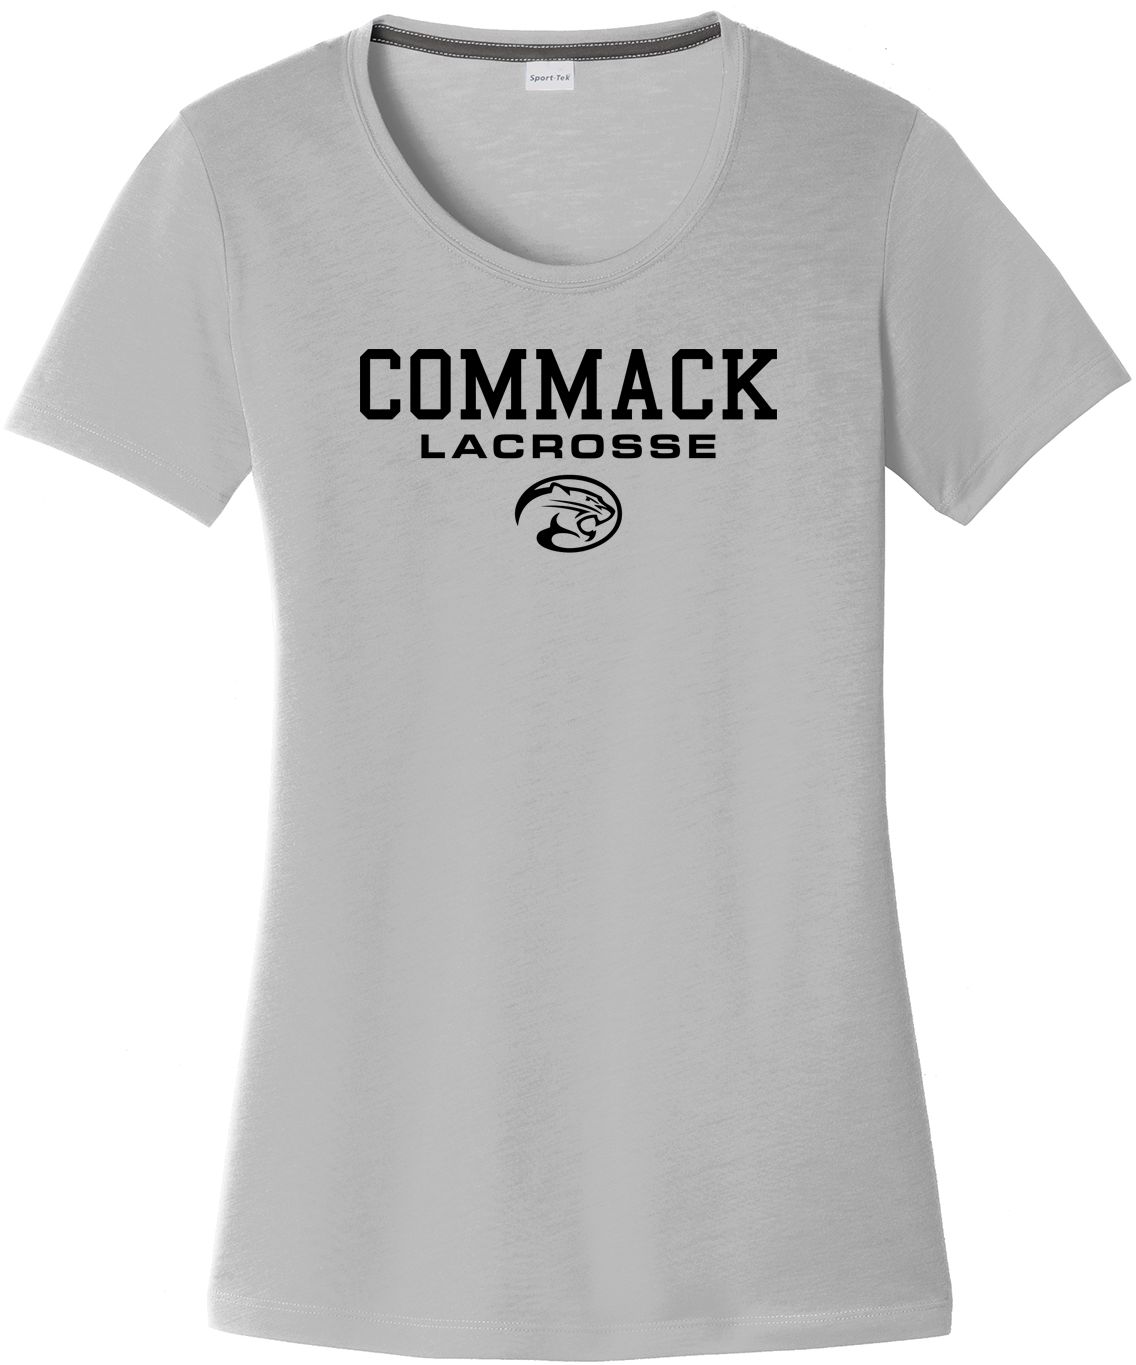 Commack Youth Lacrosse Women's Silver CottonTouch Performance T-Shirt